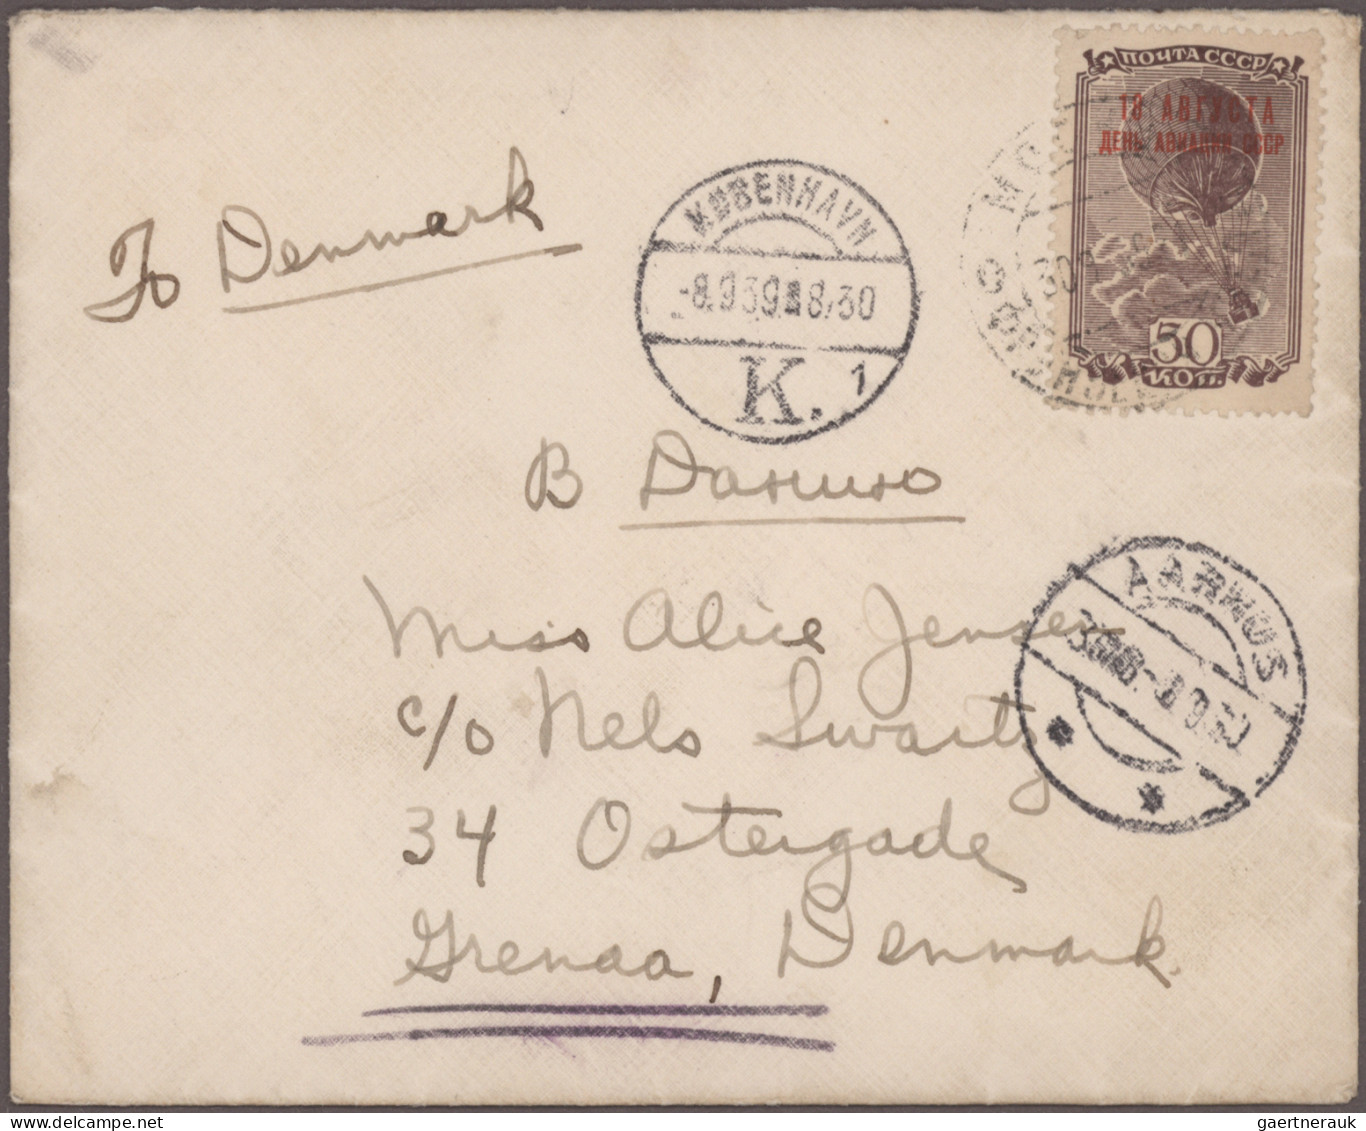 Europe: 1850-modern: About 240-250 covers, postcards and postal stationery items